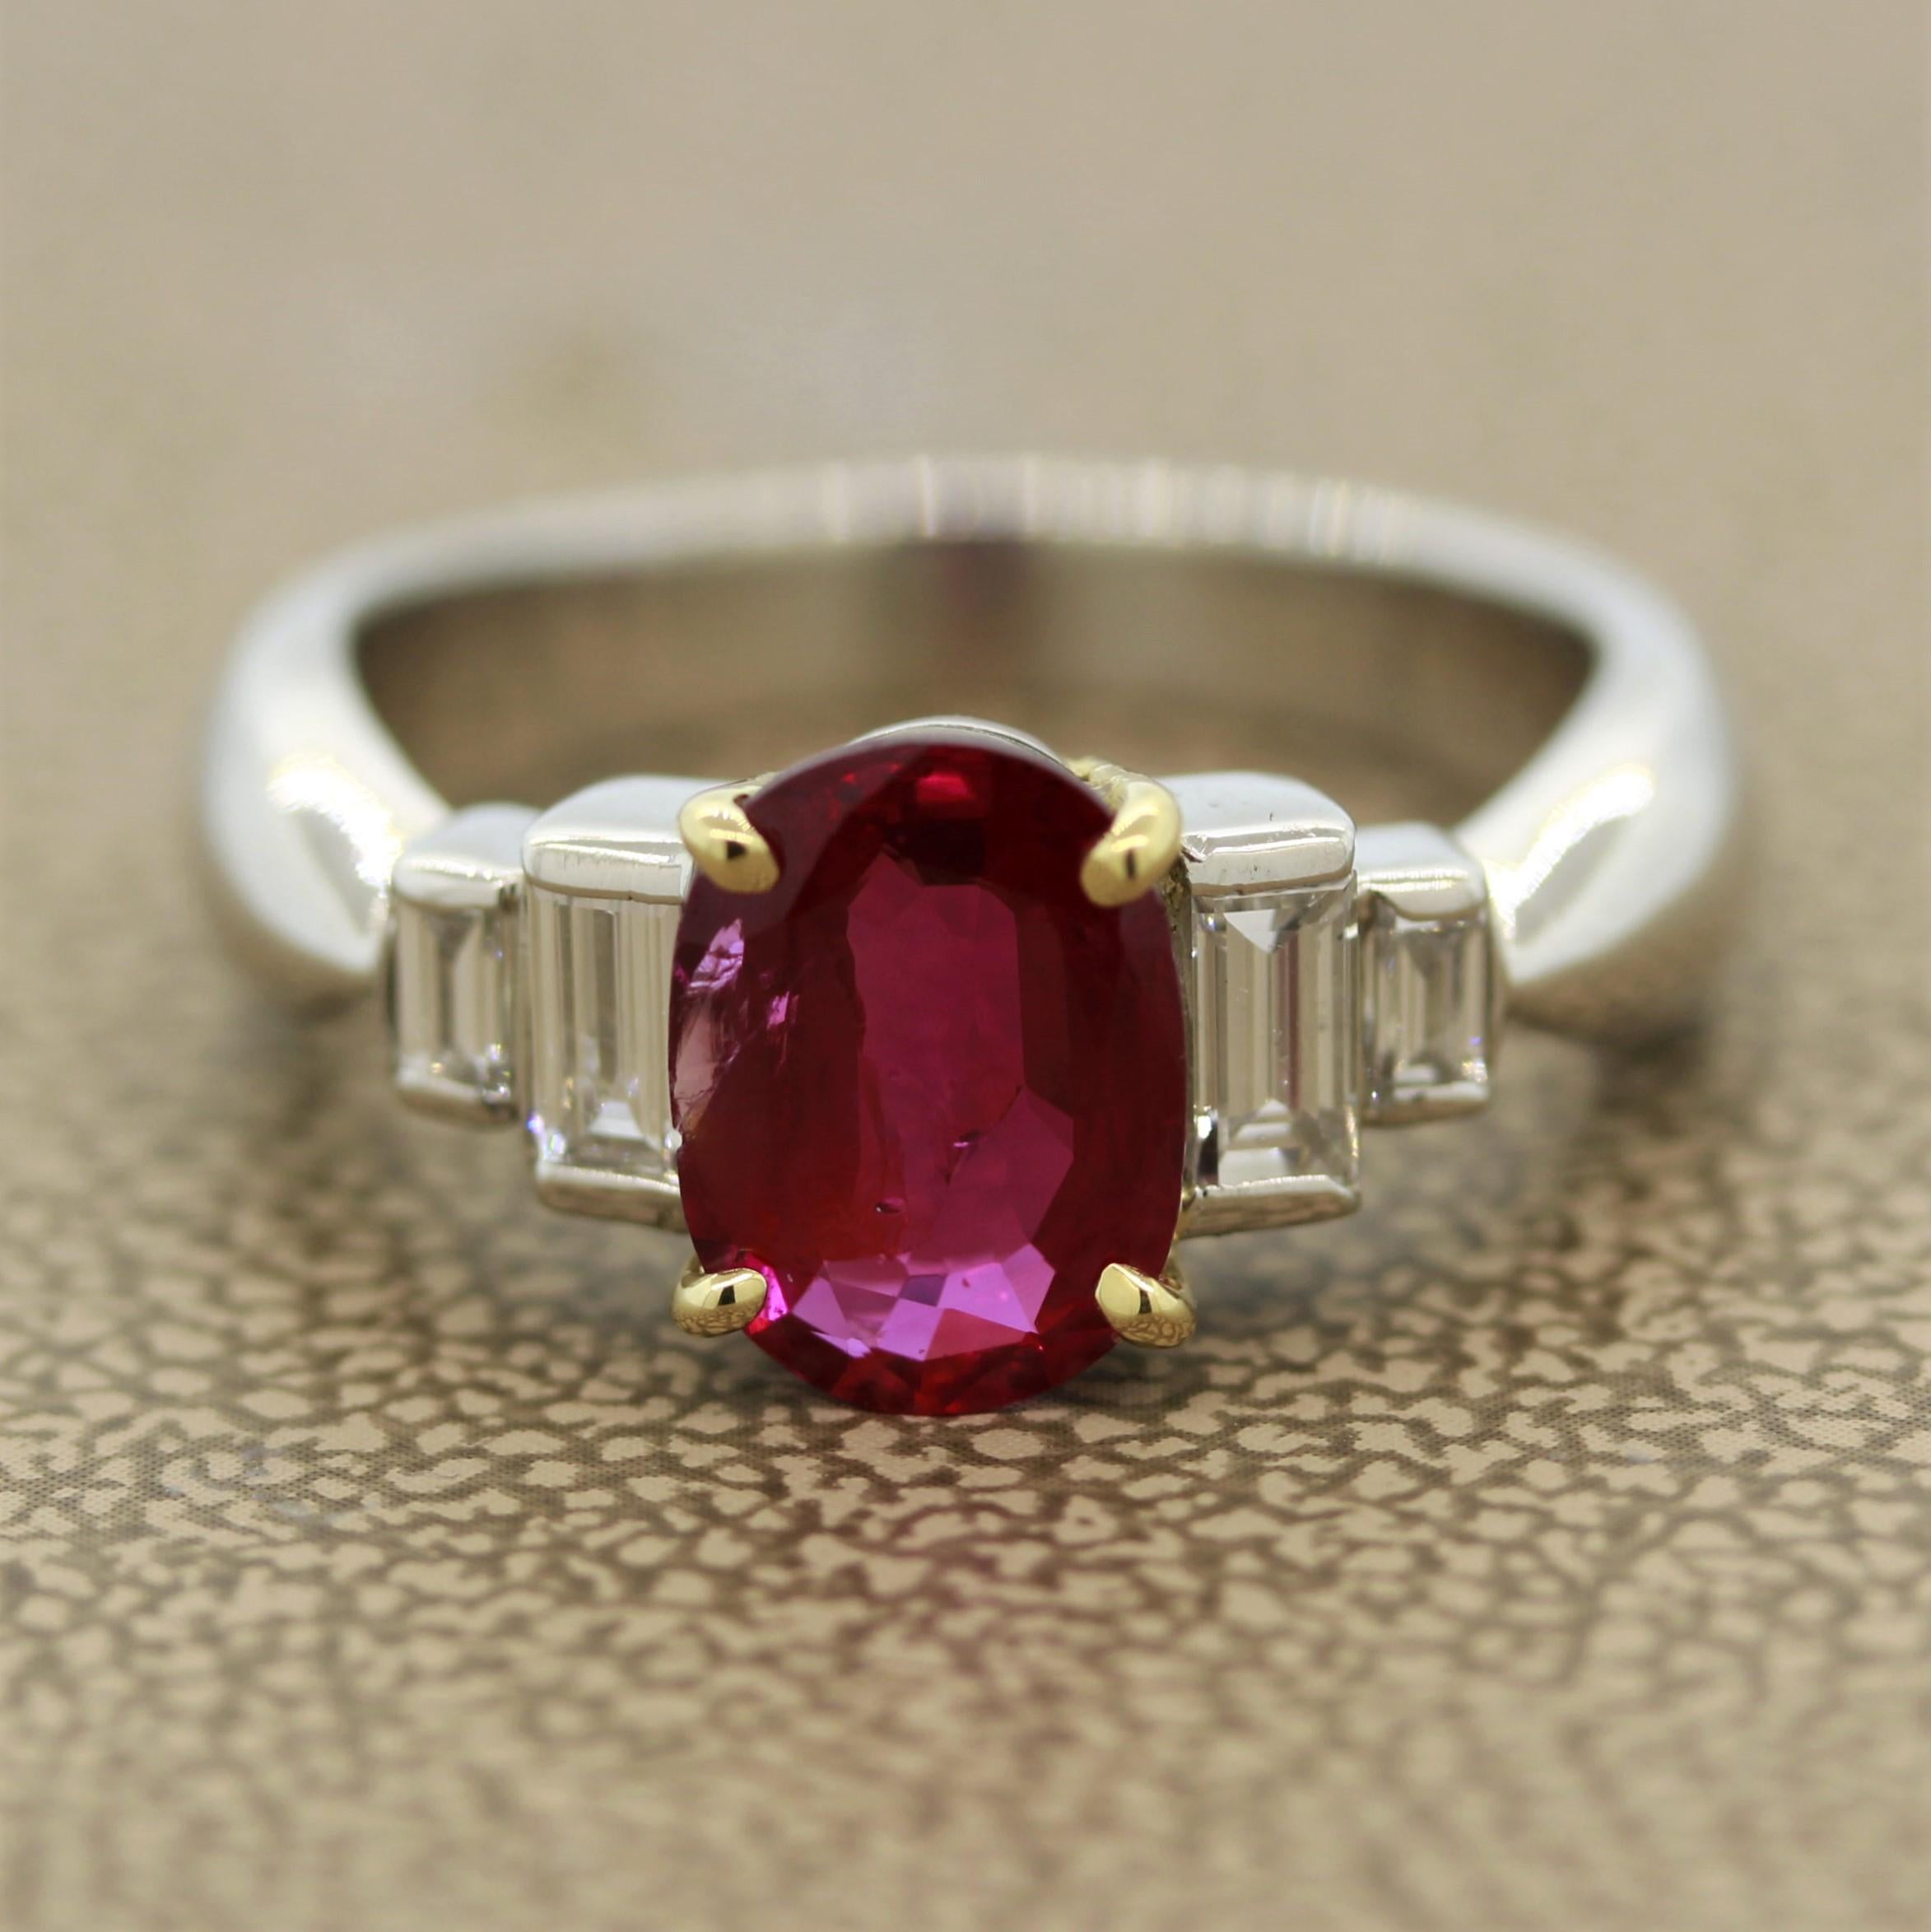 An exceptionally fine and rare stone from Myanmar (Burma) which has been certified by the GIA as natural with no treatment. It is extremely difficult to find a ruby without any treatment let alone one weighing over 1 carat. This fine stone weighs